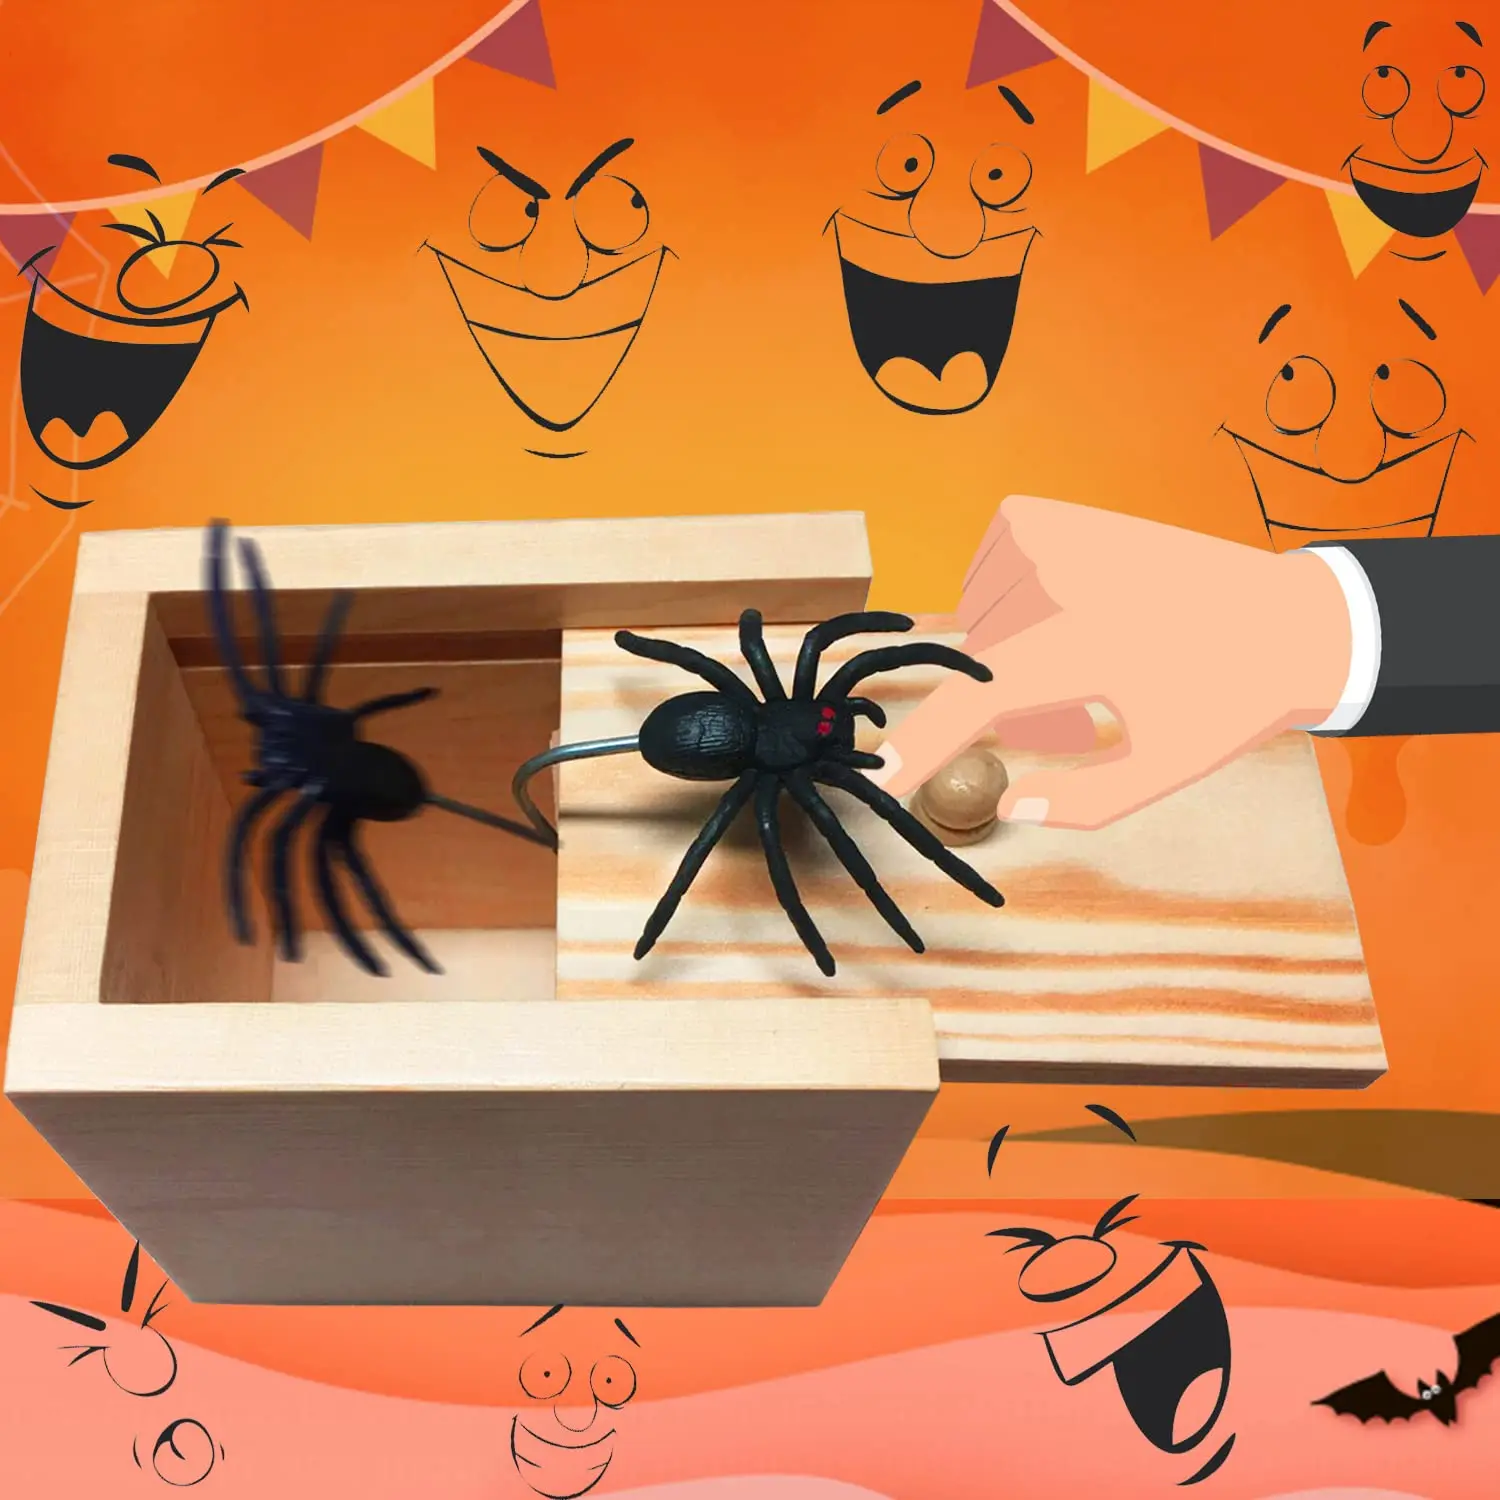 Wooden Prank Trick Practical Joke Home Office Scare Toy Box Gag Spider Kid Parents Friend Funny Play Joke Gift Surprising Box